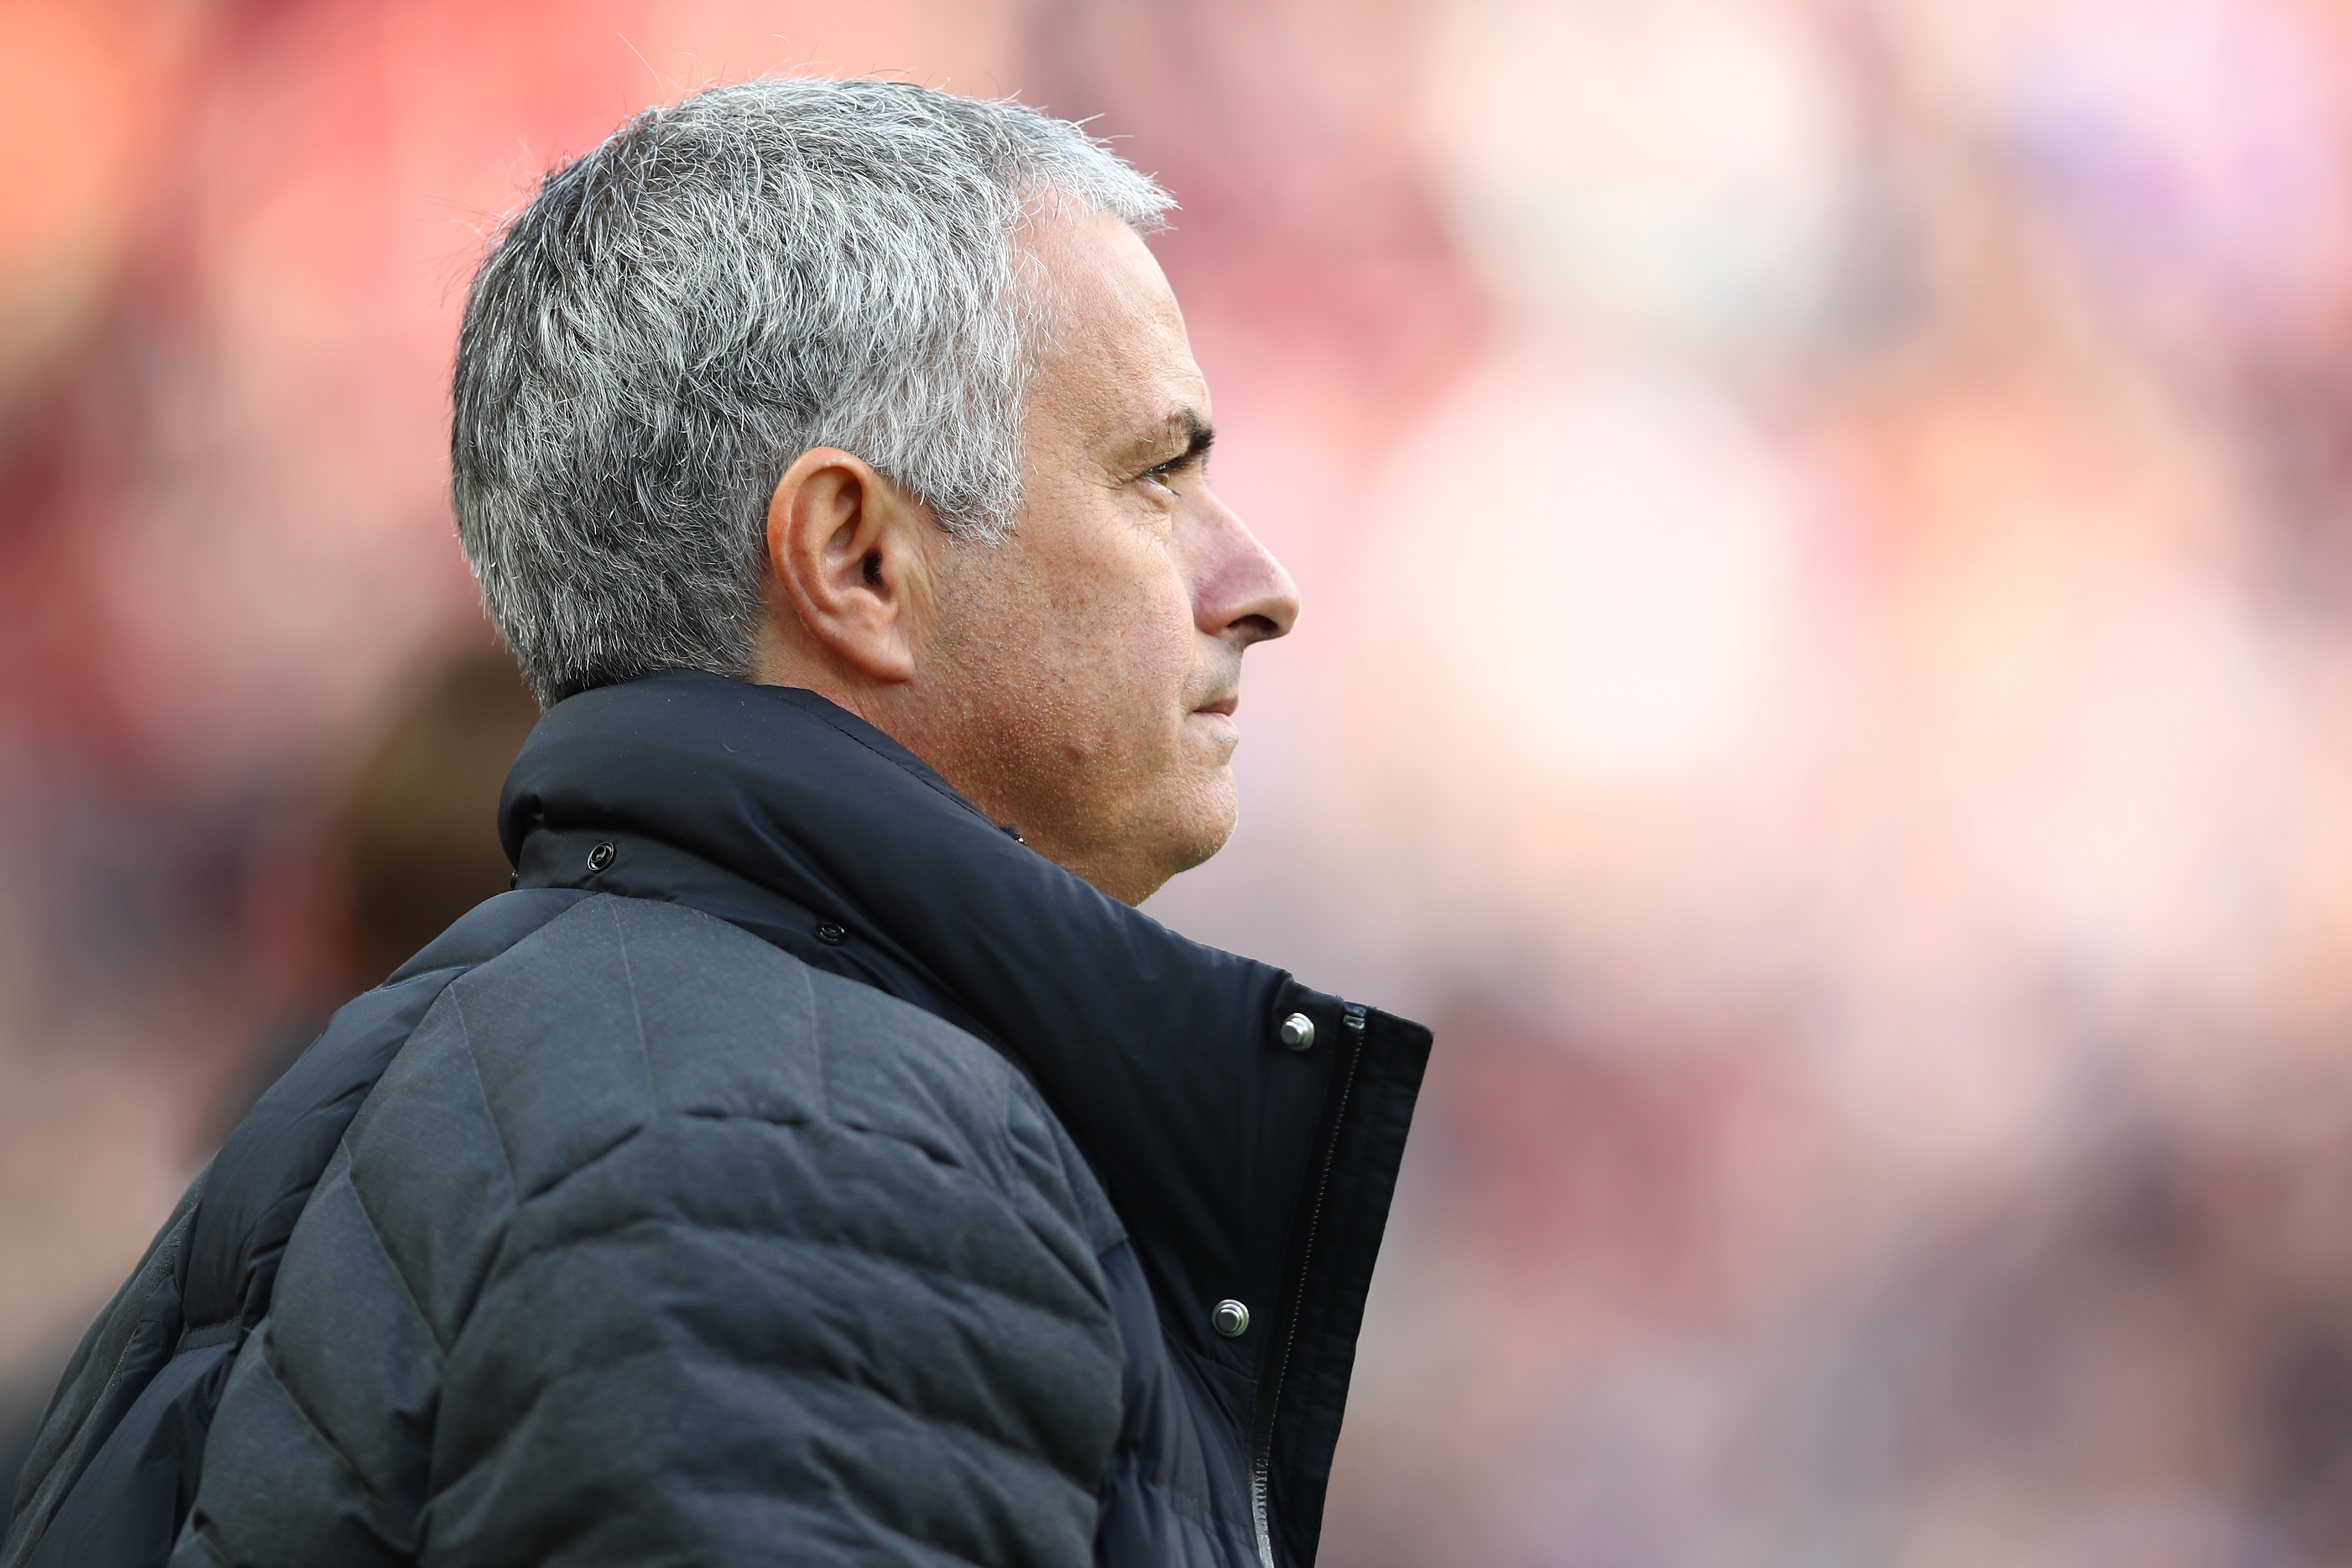 MANCHESTER, ENGLAND - OCTOBER 02:  Jose Mourinho, Manager of Manchester United looks on during the Premier League match between Manchester United and Stoke City at Old Trafford on October 2, 2016 in Manchester, England.  (Photo by Clive Brunskill/Getty Images)